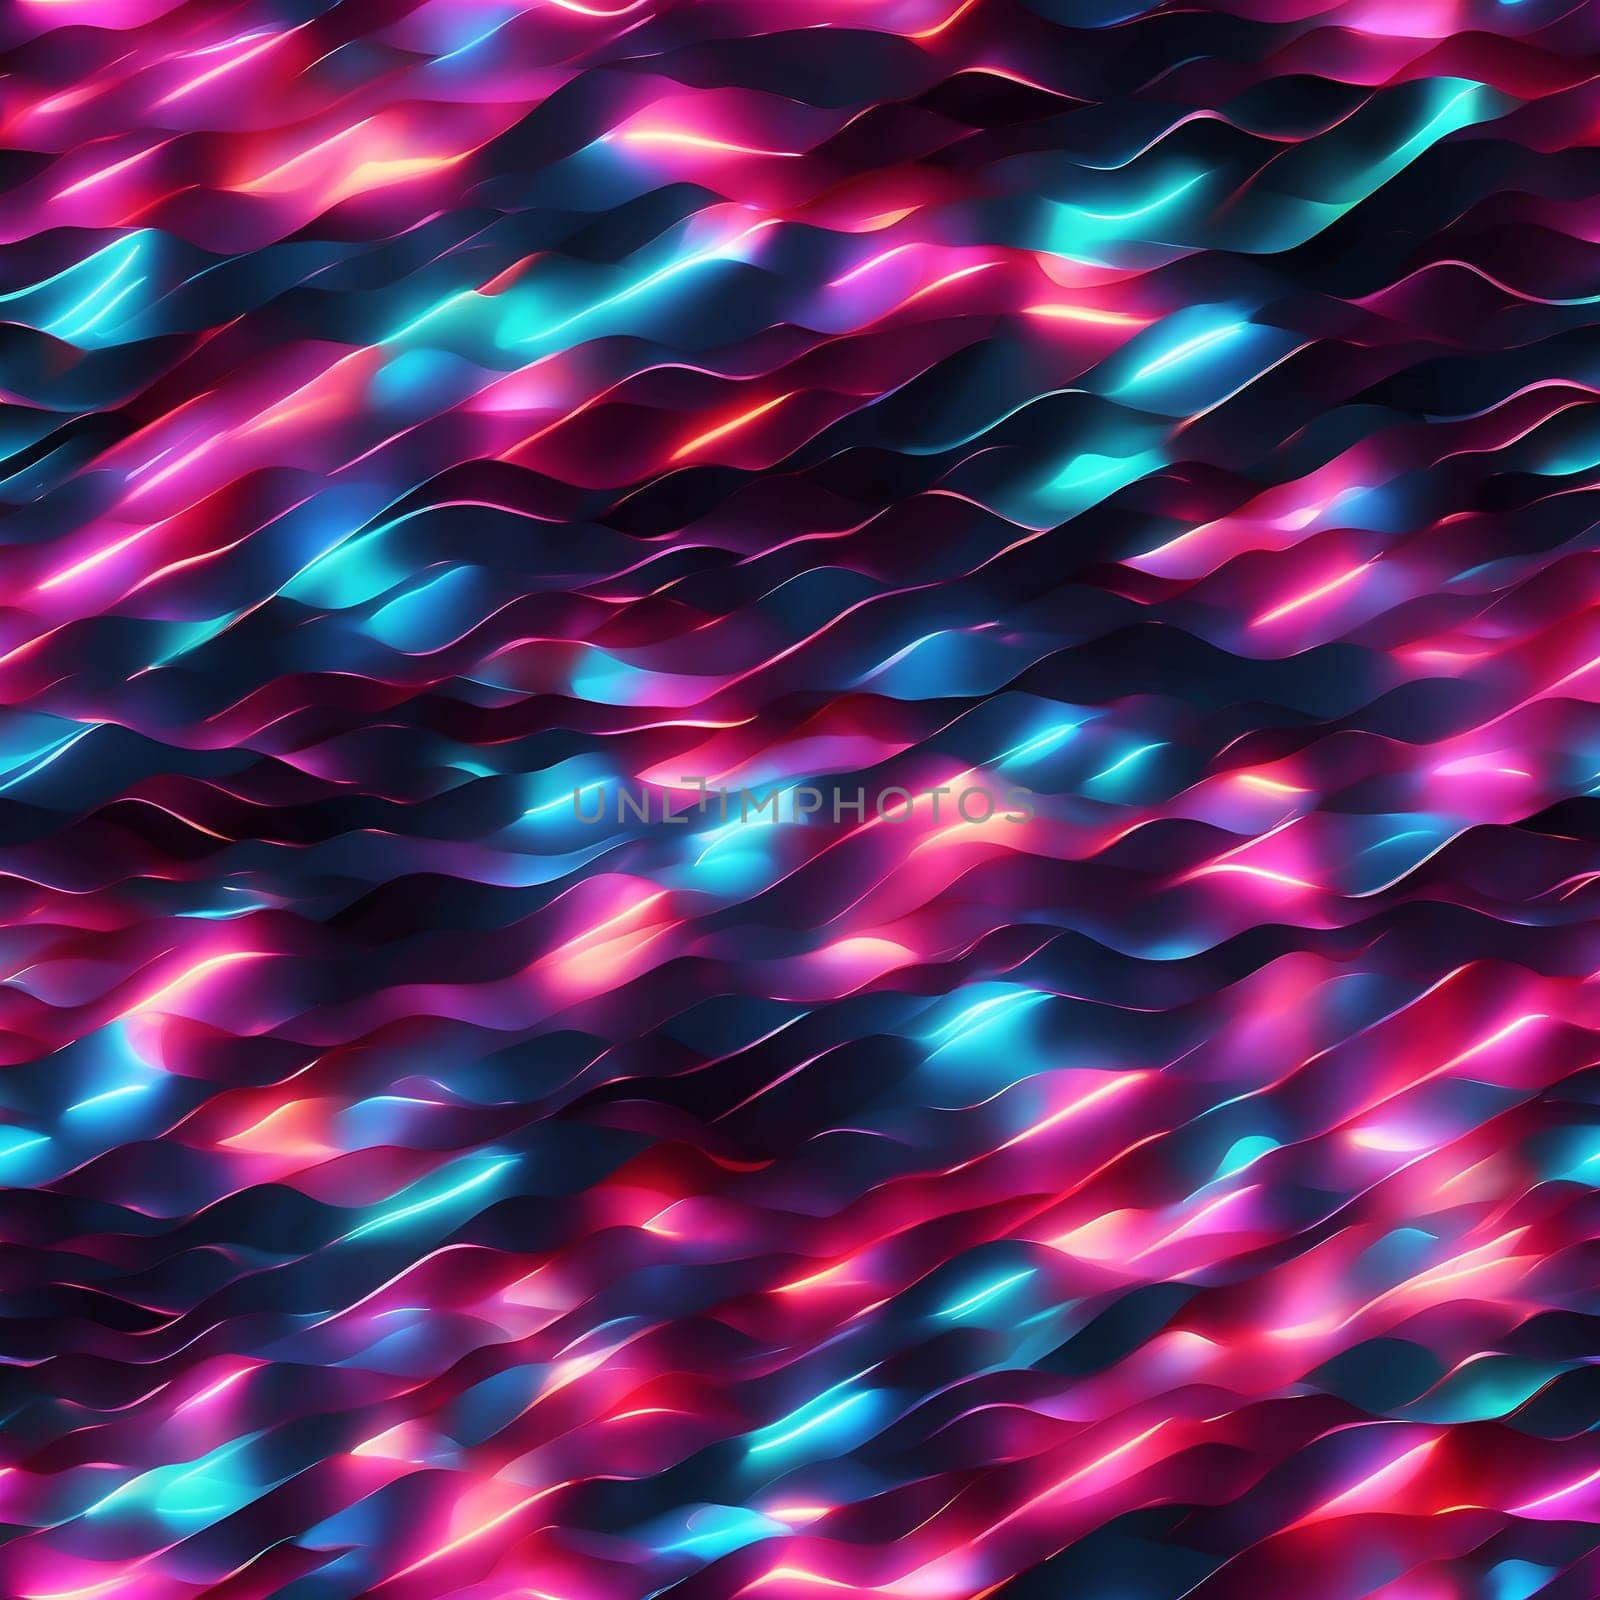 A seamless pattern featuring an abstract background filled with an array of colorful lights.